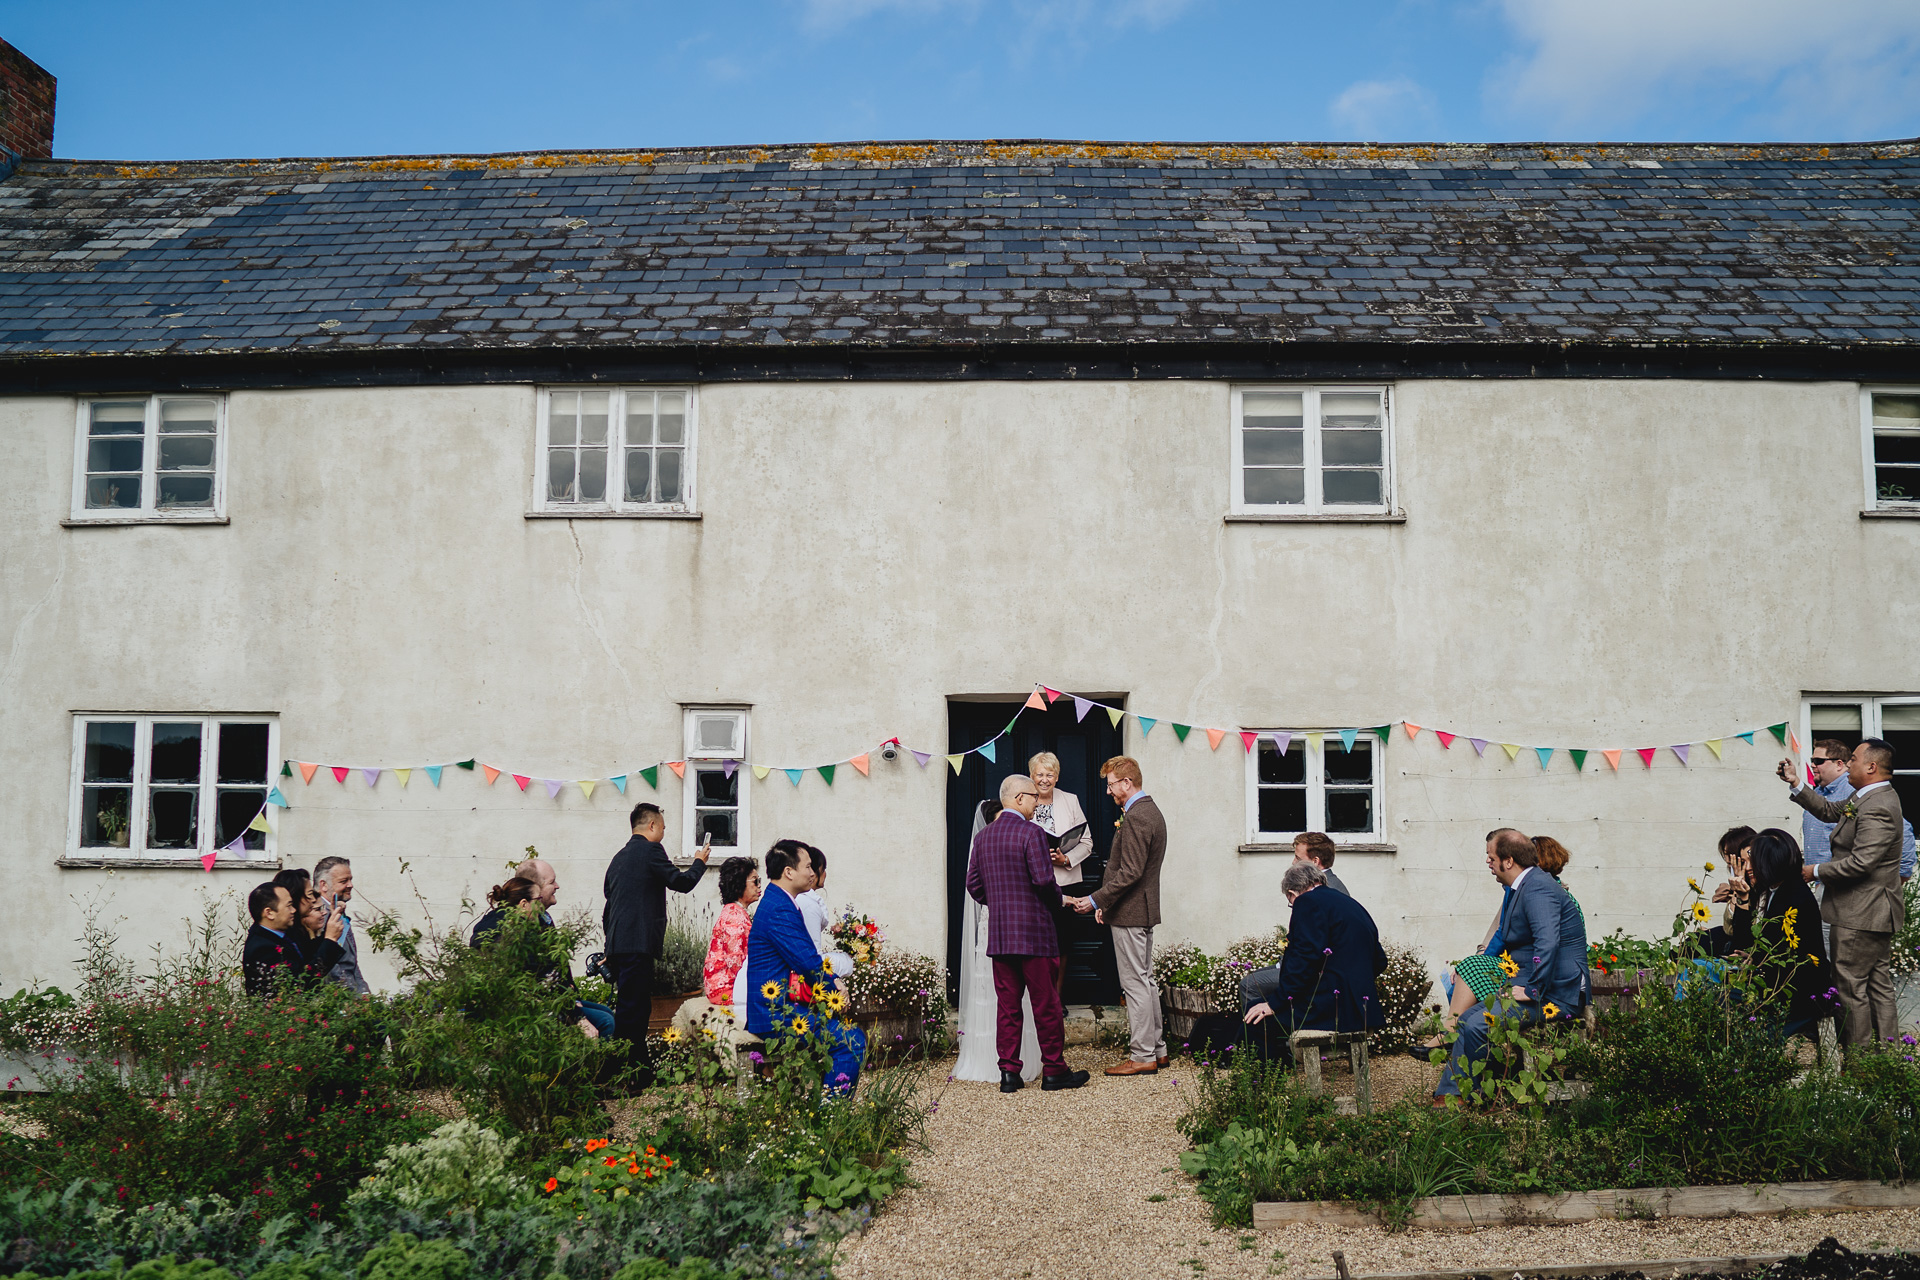 An outdoor autumn wedding ceremony in a kitchen garden, with River Cottage farmhouse behind